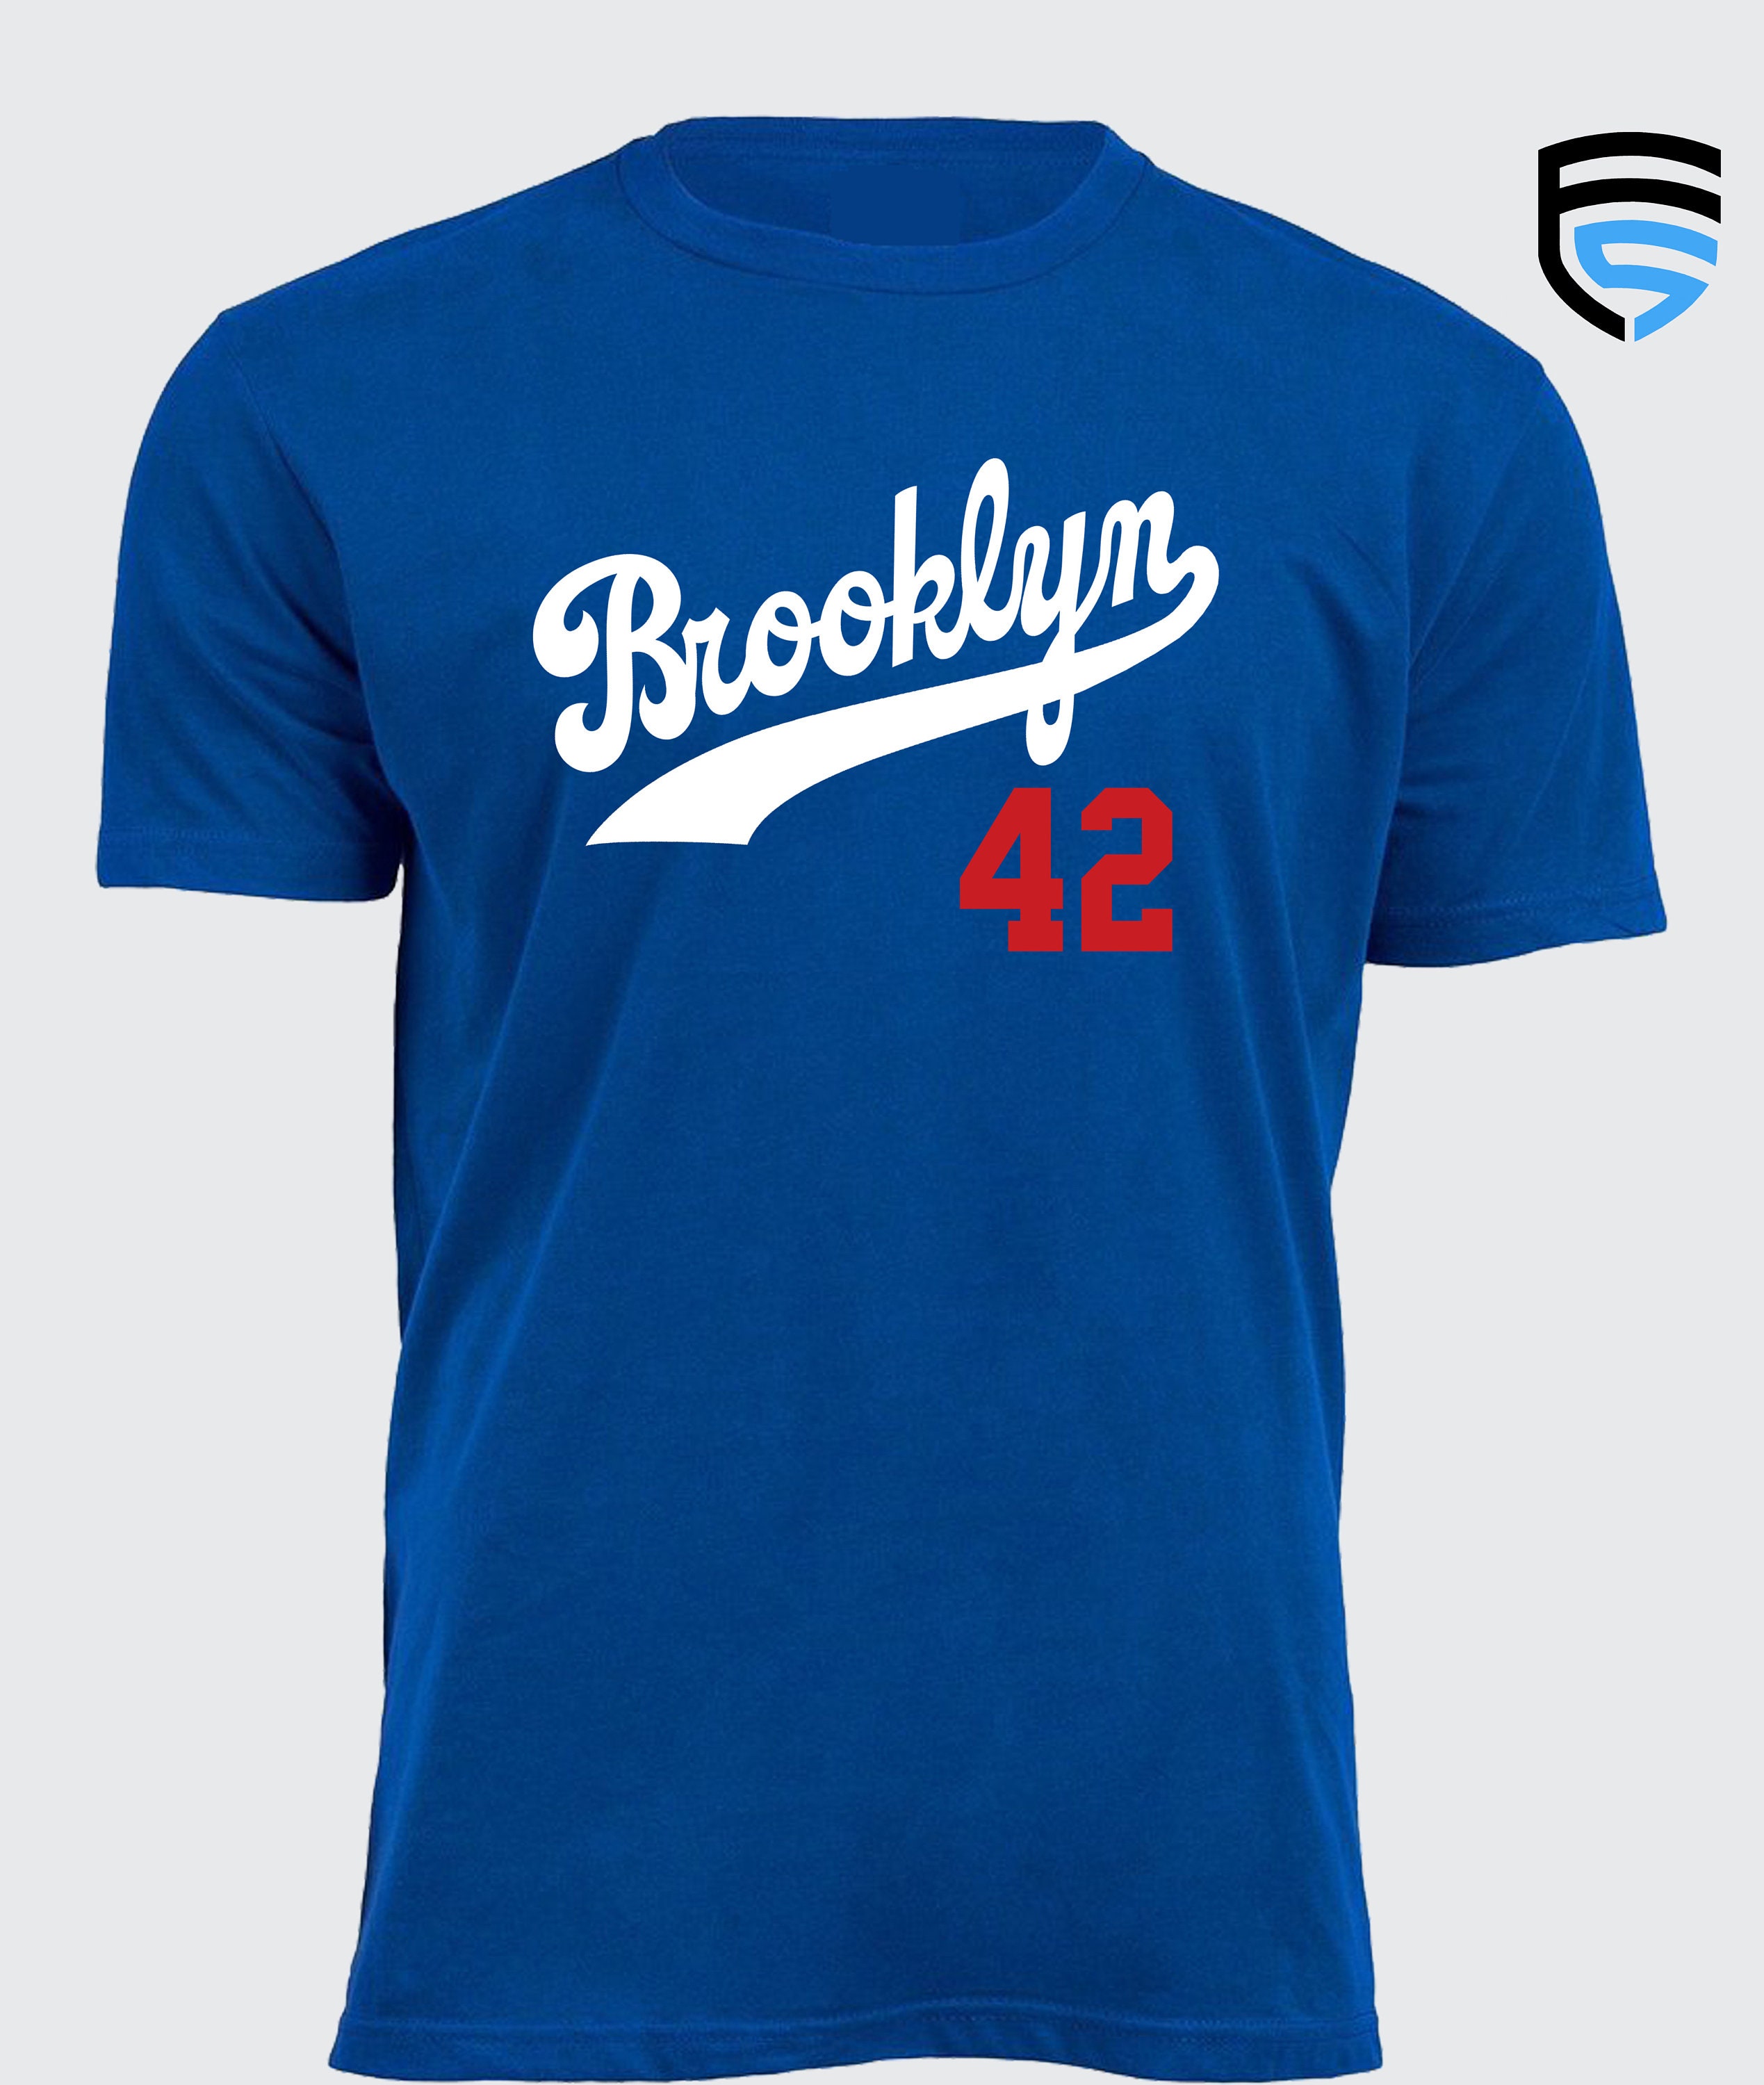 Outerstuff Jackie Robinson Brooklyn Dodgers #42 Youth Size Player Name & Number T-Shirt